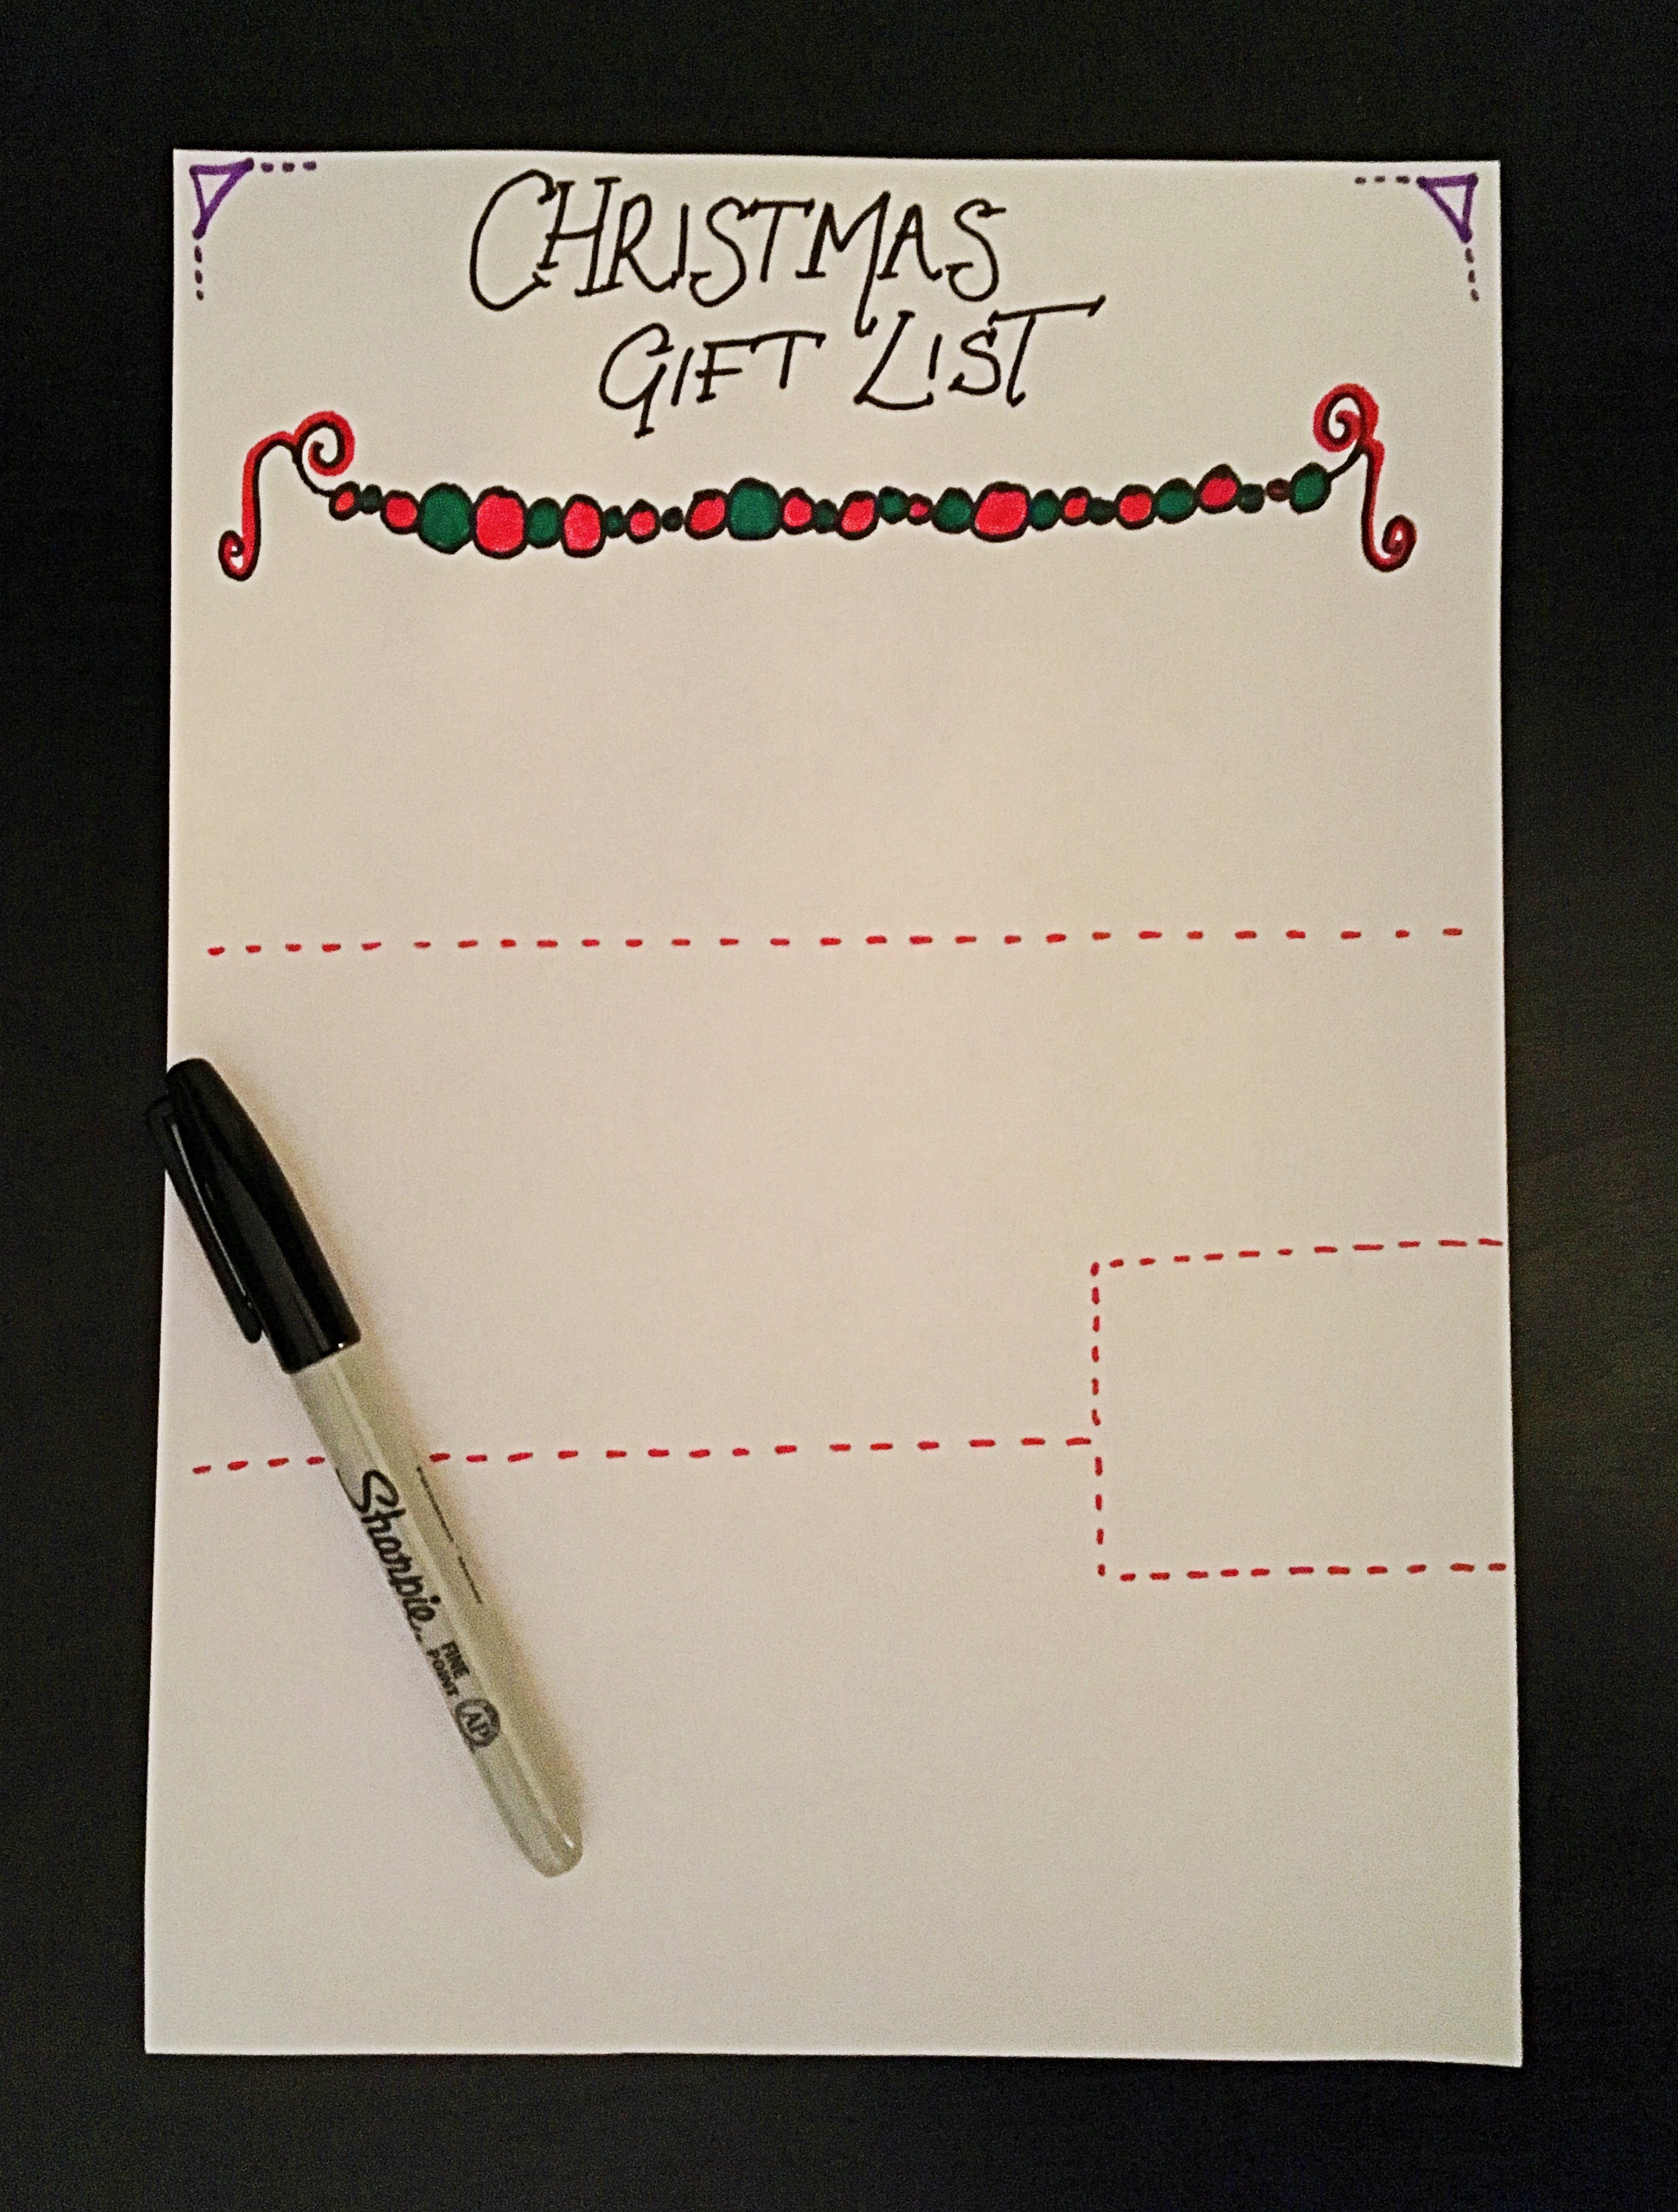 An A4 piece of paper in which I've written "Christmas Gift Lift" and decorated it in green and red. A Sharpie pen is on the paper.